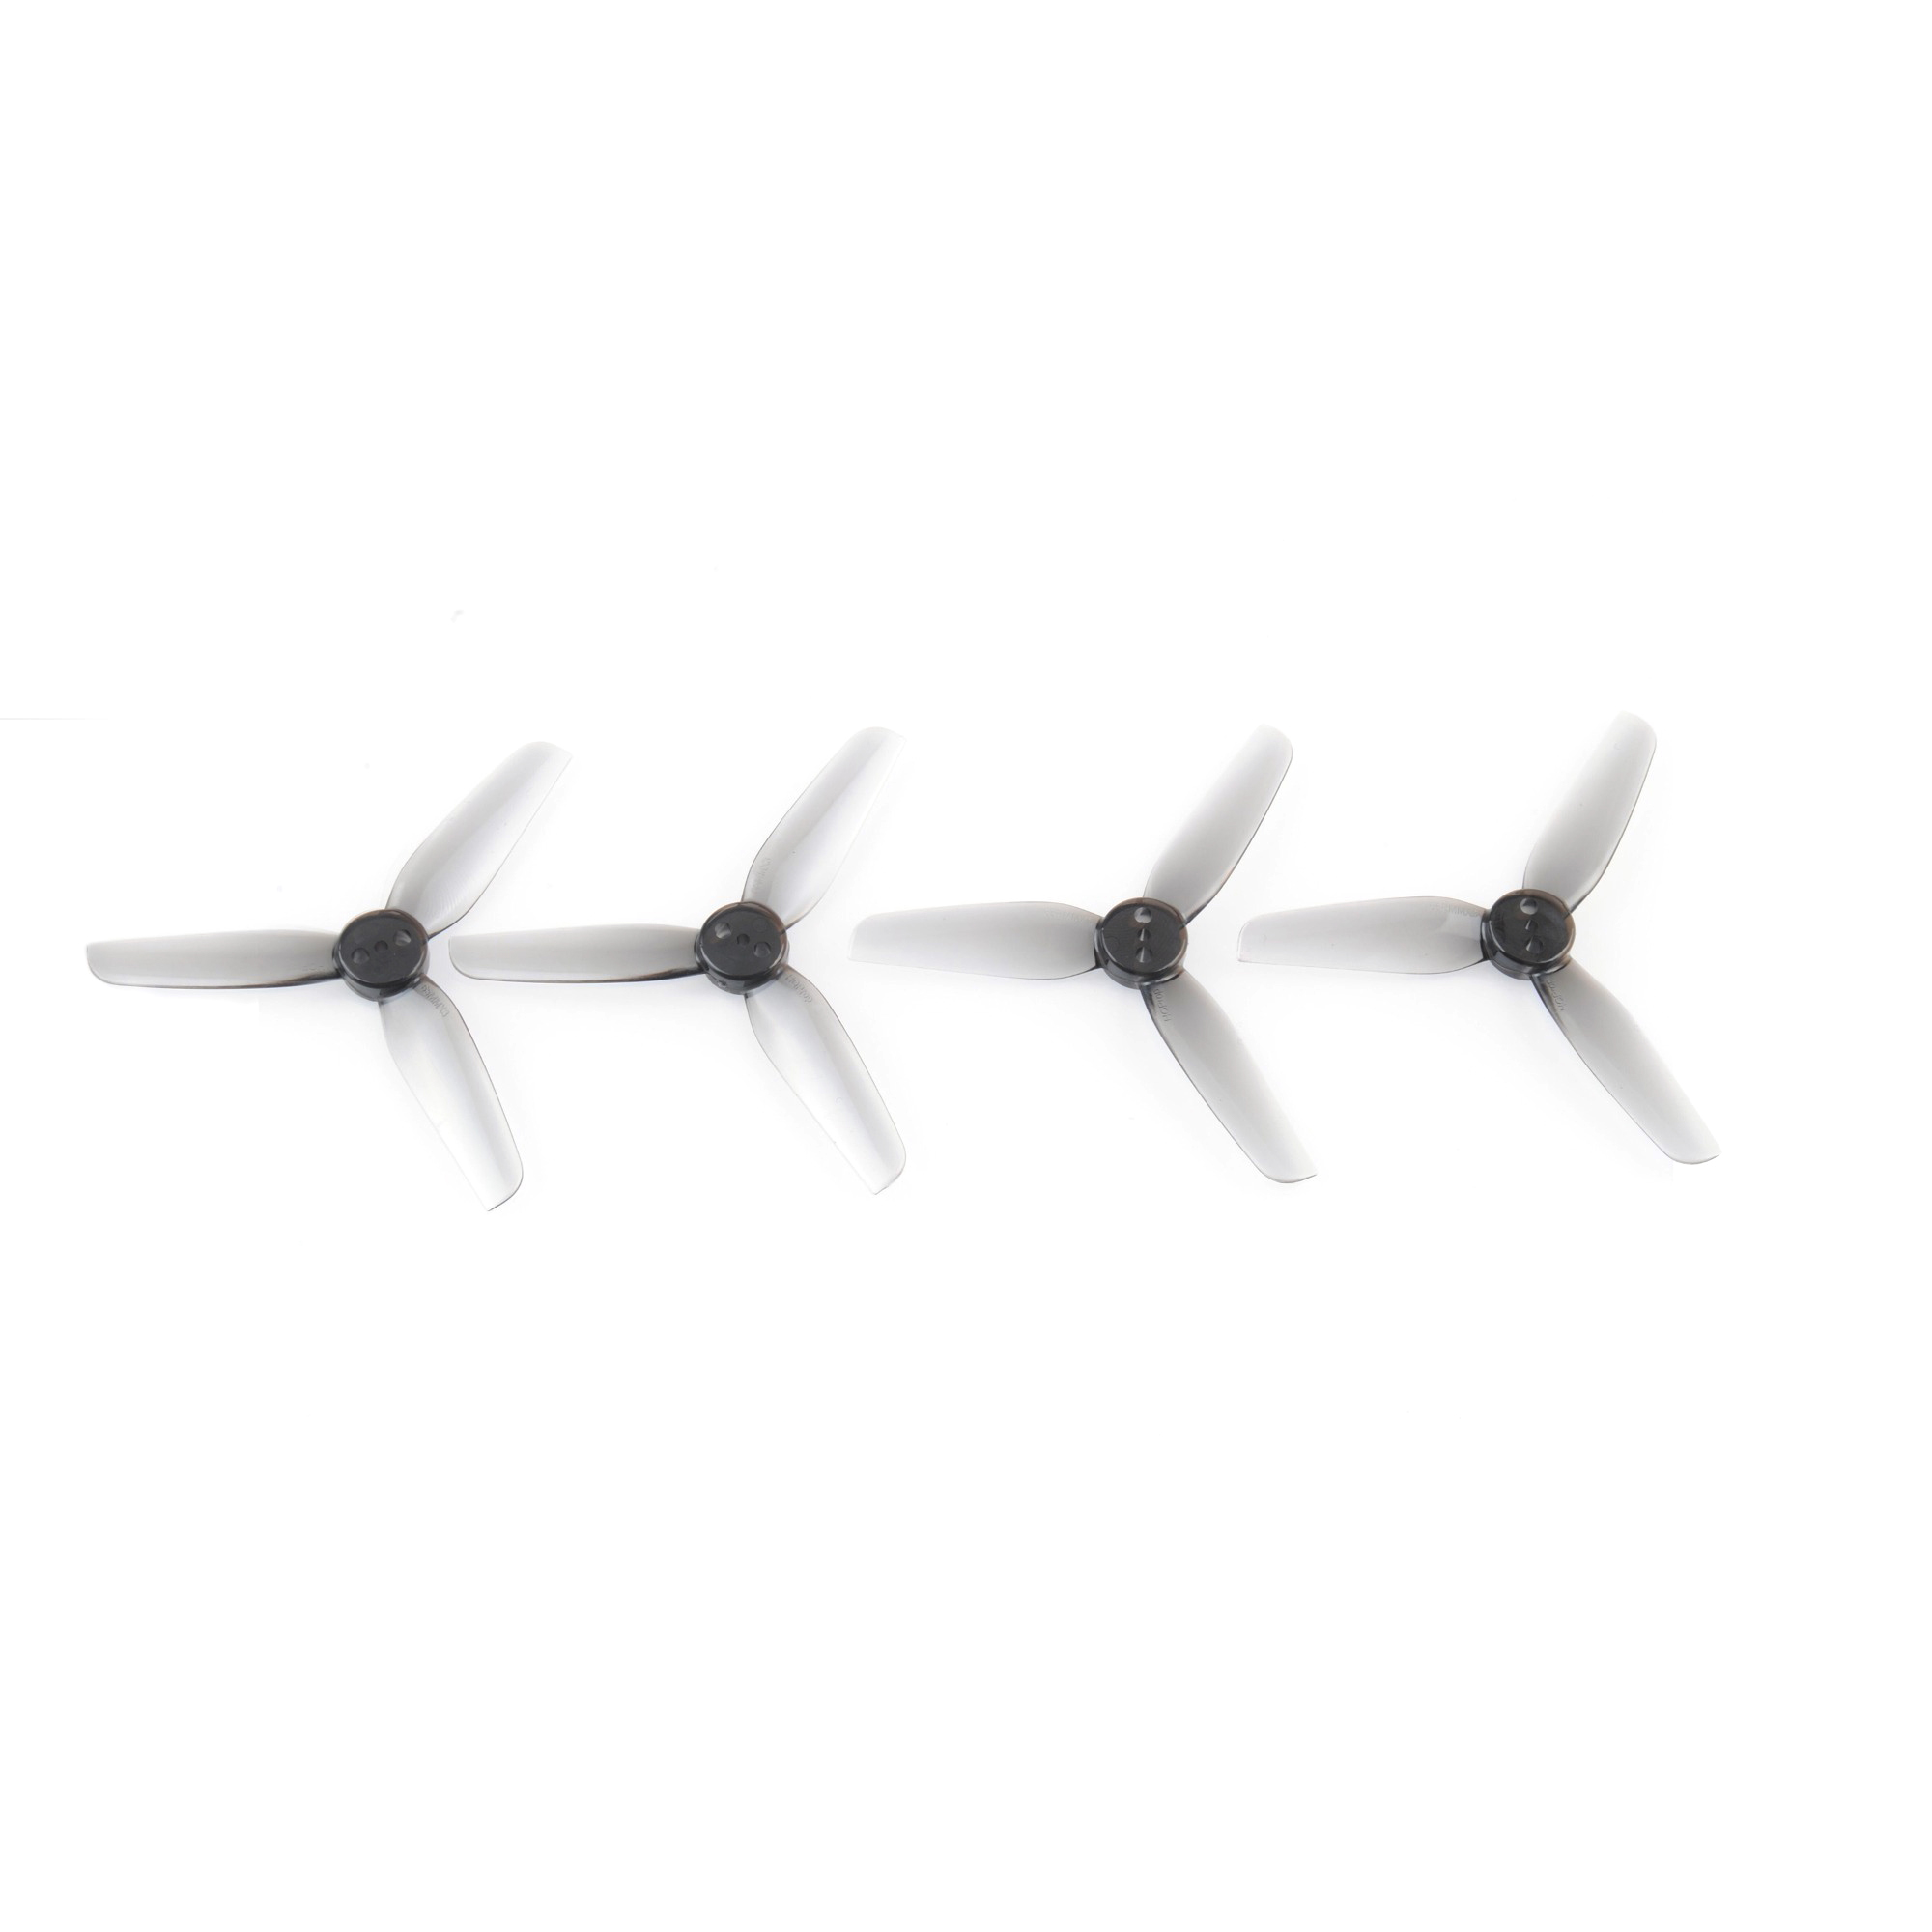 2 Pairs HQ Prop Durable T65MMX3 65mm 2.5 Inch 3-blade PC Propeller 2CW+2CCW for Toothpick TWIG Whoop RC Drone FPV Racing - Photo: 2